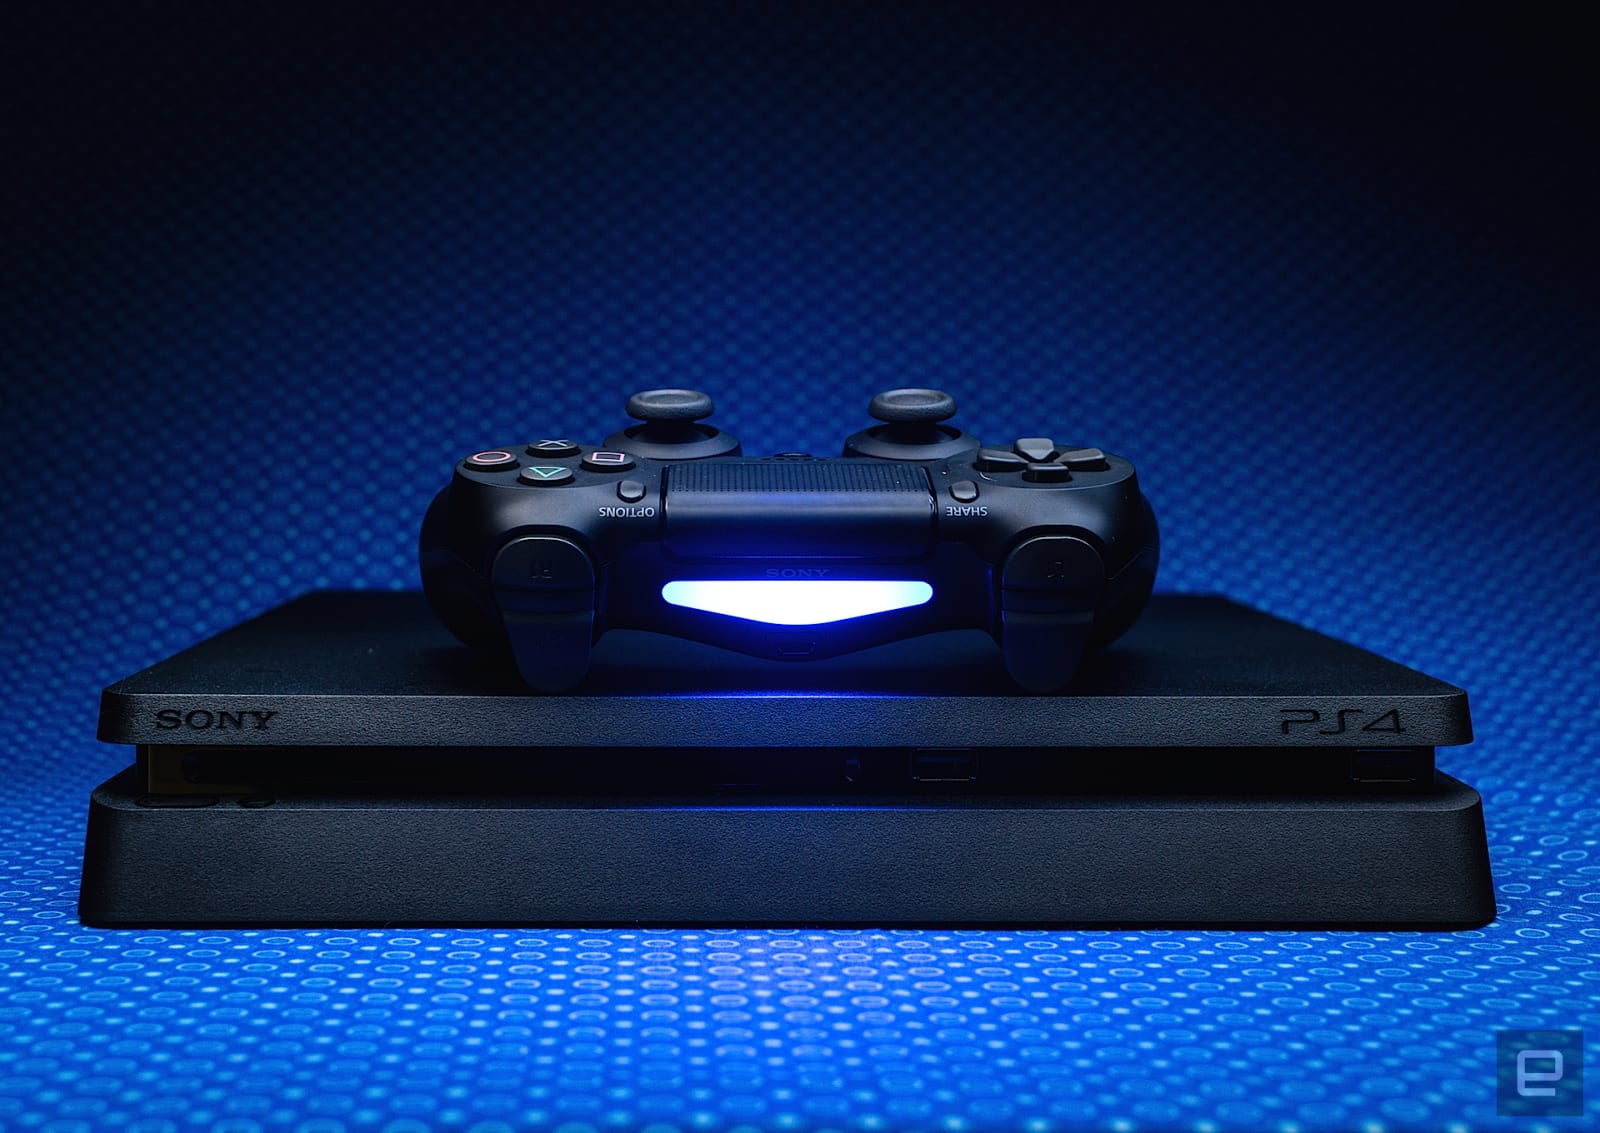 PlayStation 4 Games will be available on PlayStation Now